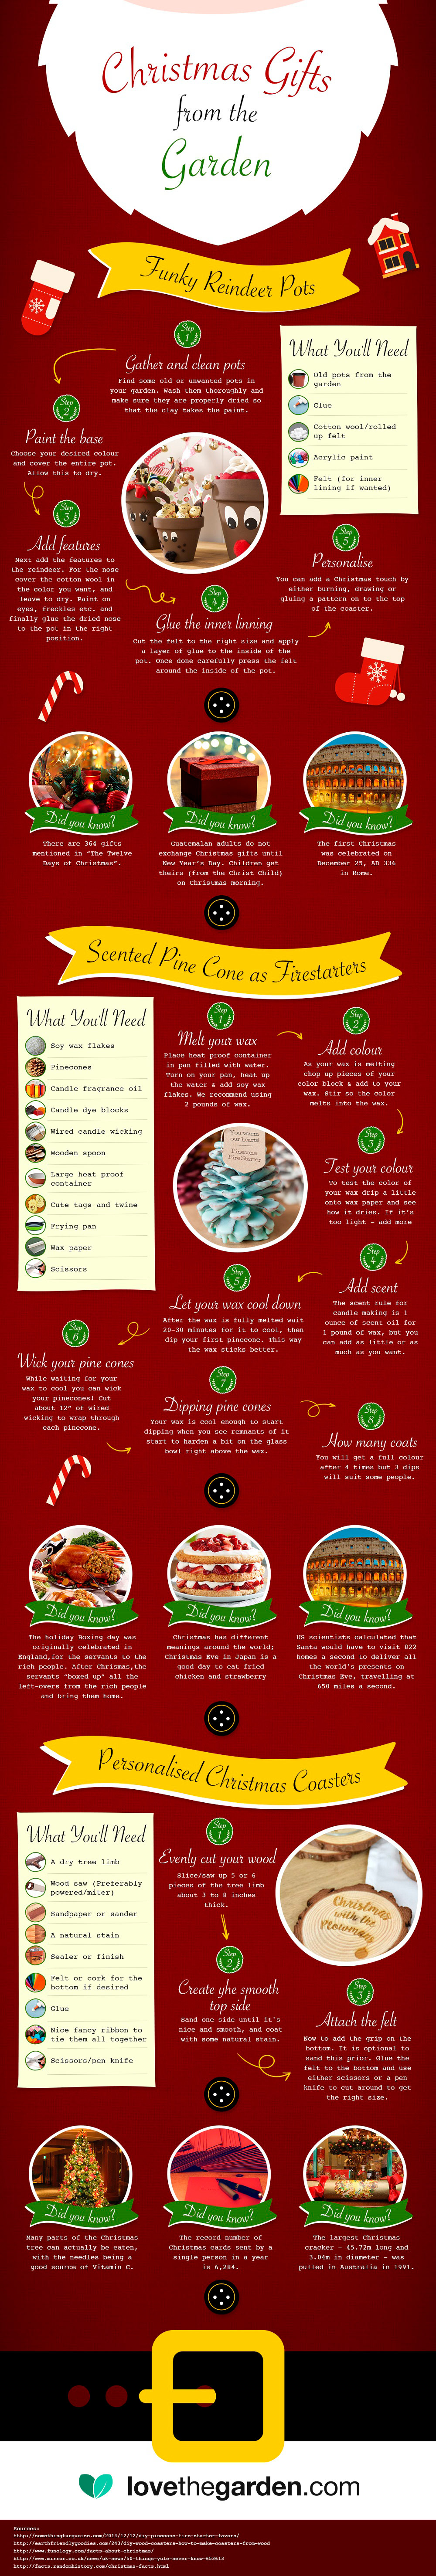 Christmas gifts from the garden infographic